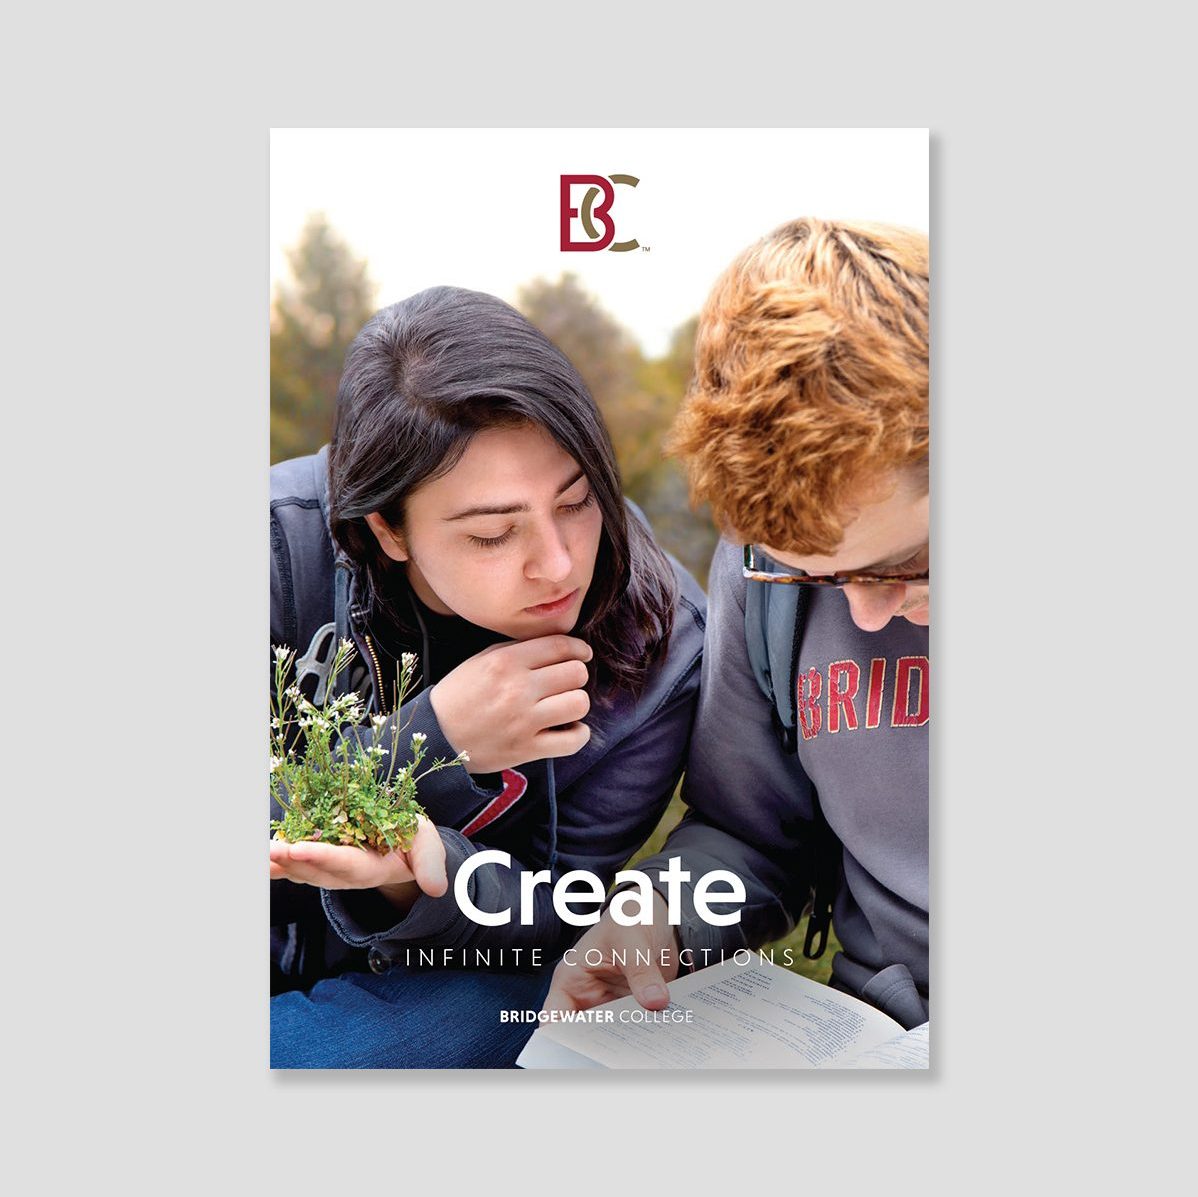 Brochure cover showing two students. Text: Create infinite connections.